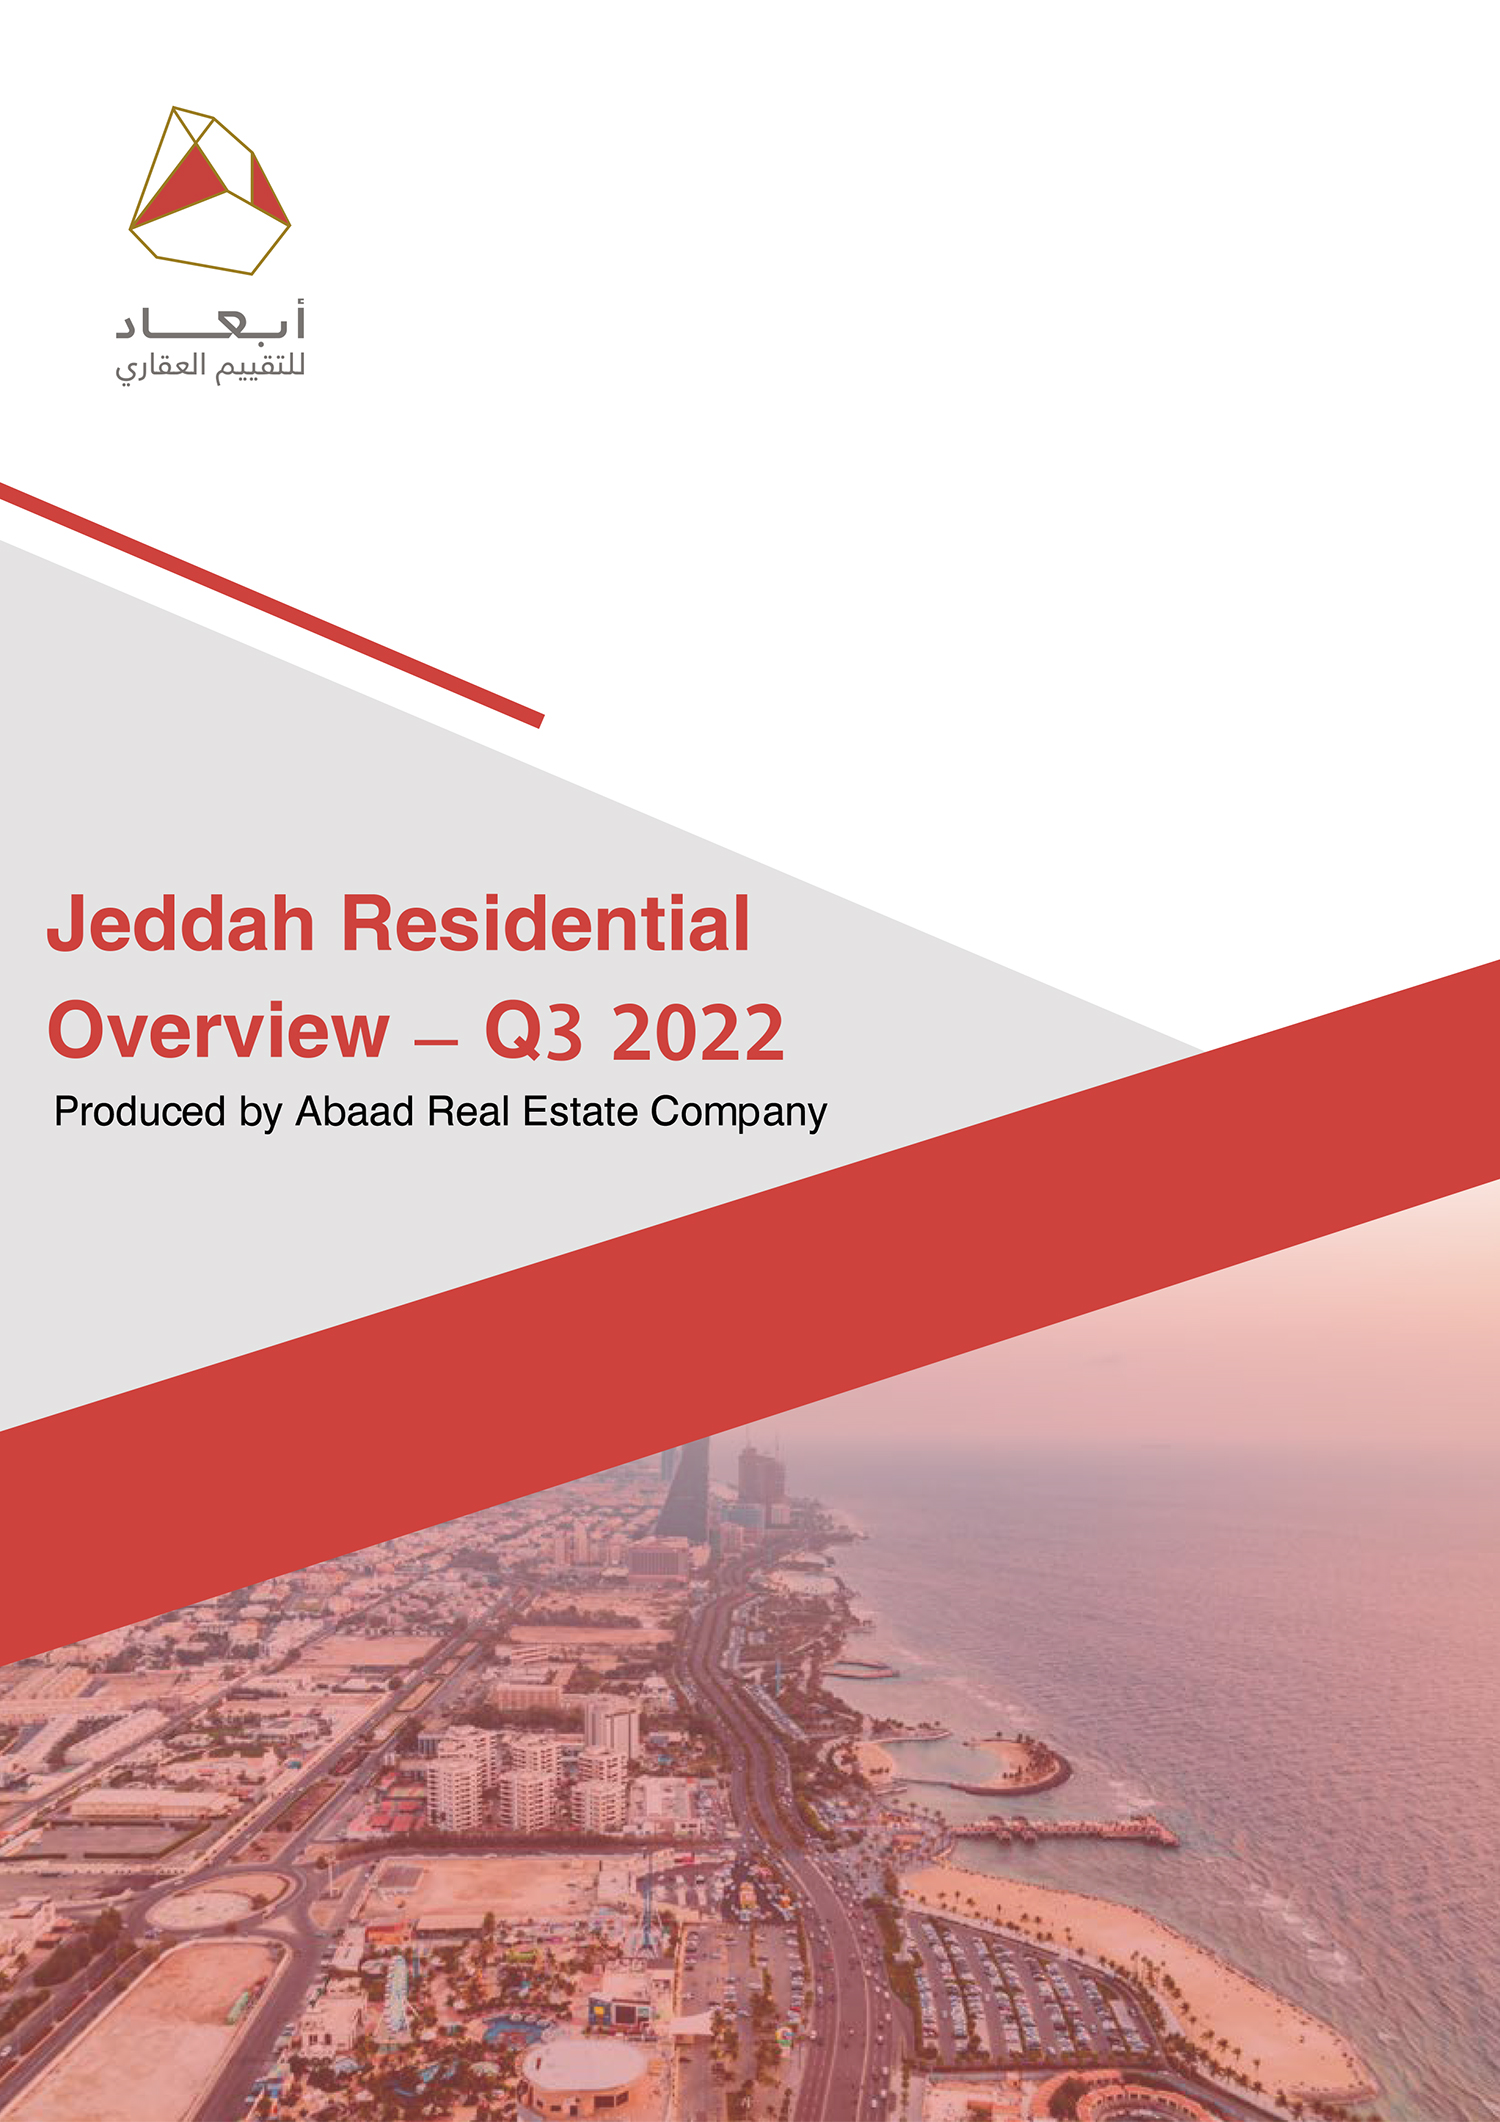 Jeddah Residential Land Overview Q3 2022